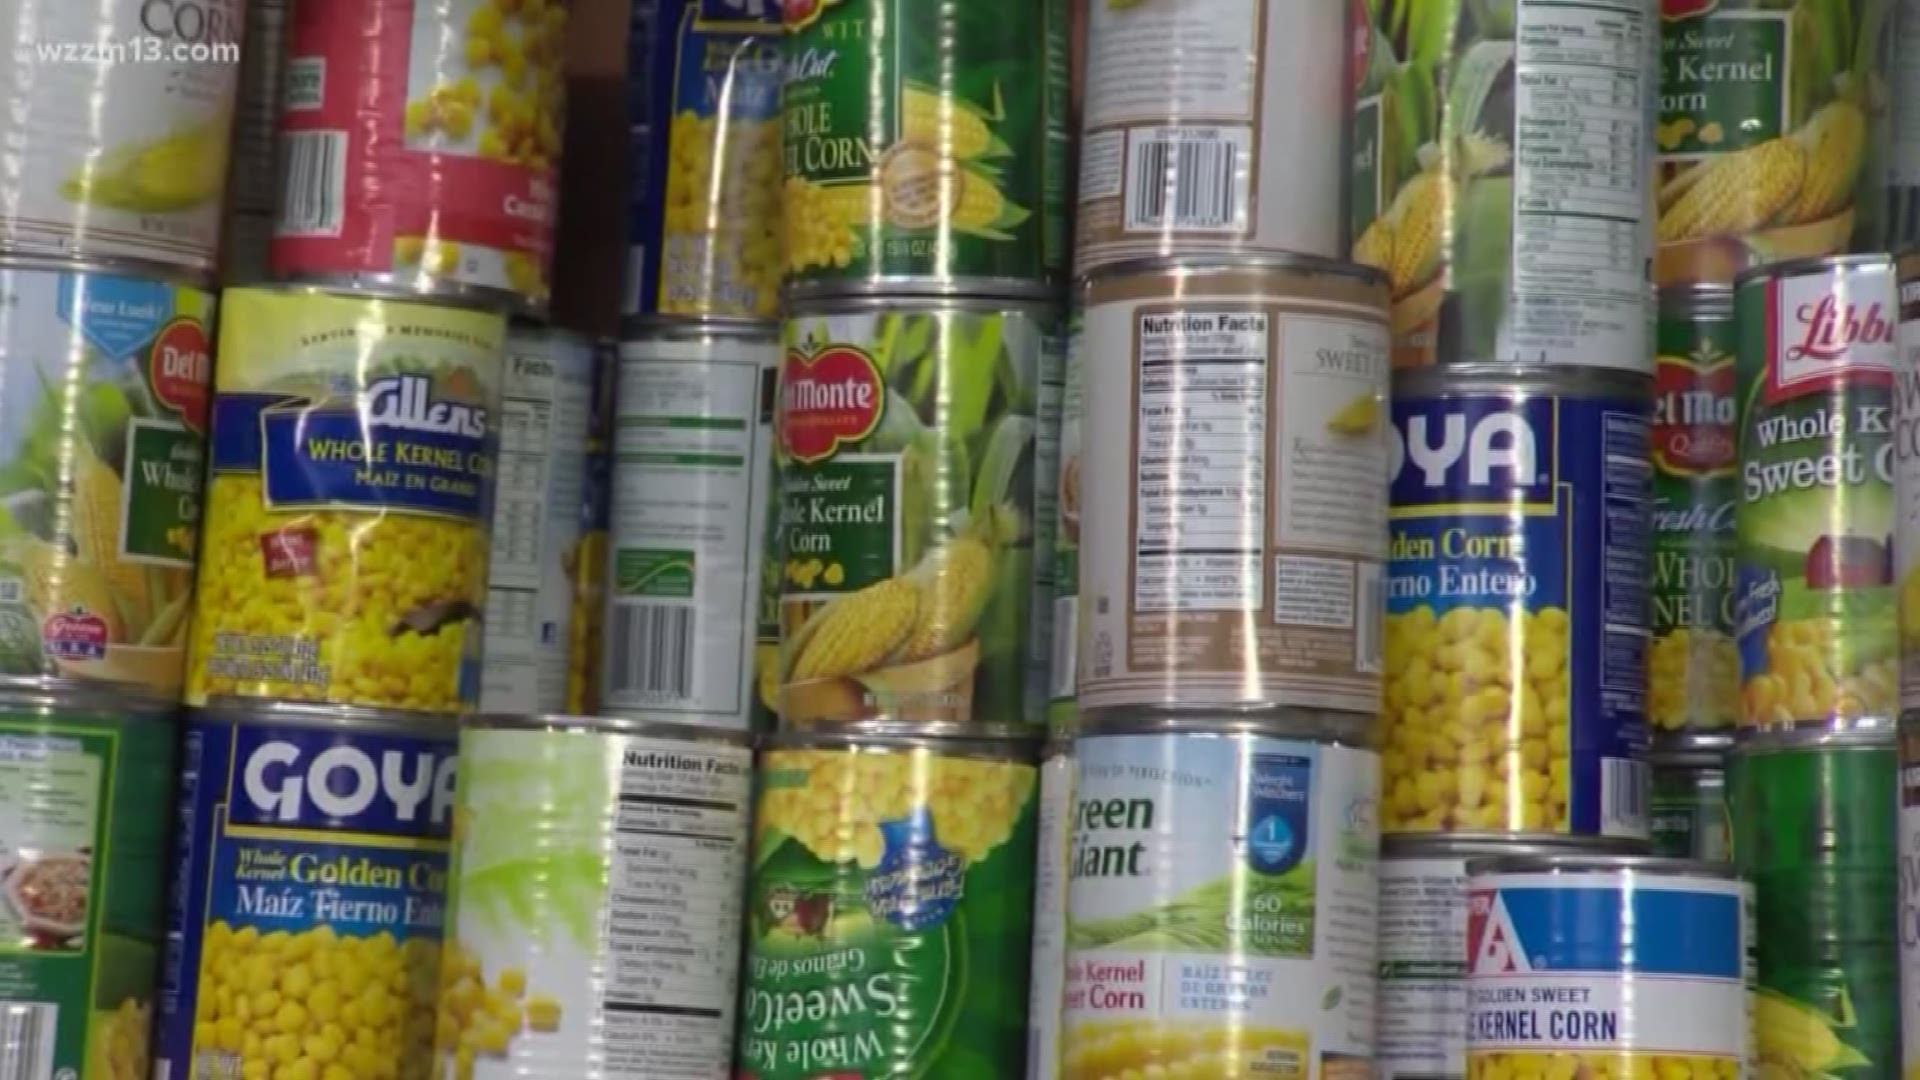 With Michigan handing out food assistance program benefits early for February, should people ration their assistance?